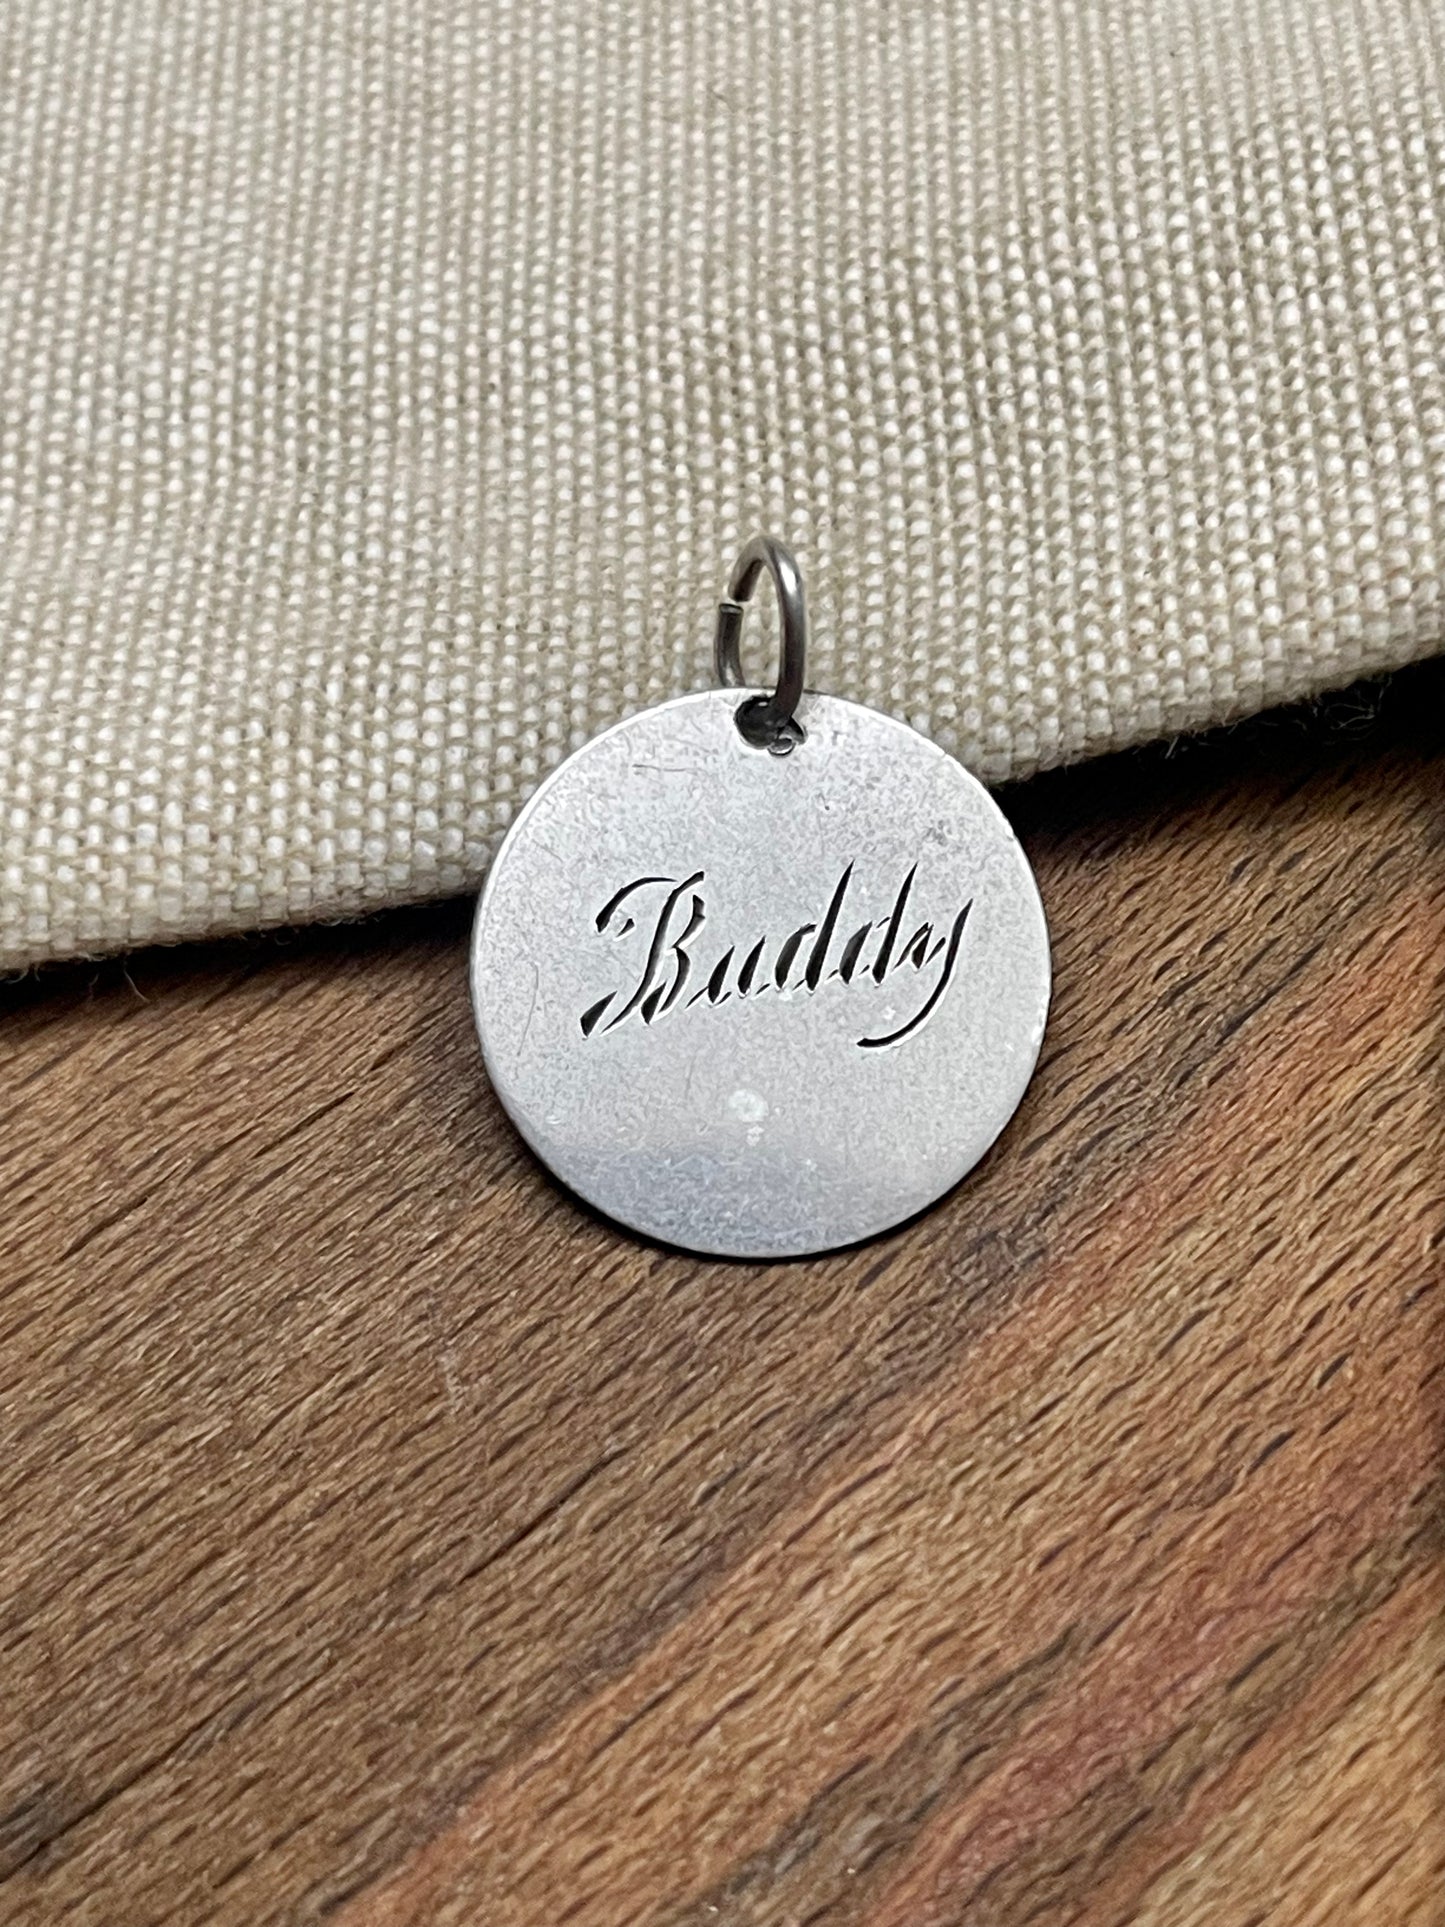 BUDDY Name Engraved Charm ID Pendent Solid 925 Sterling Silver Vintage Jewelry